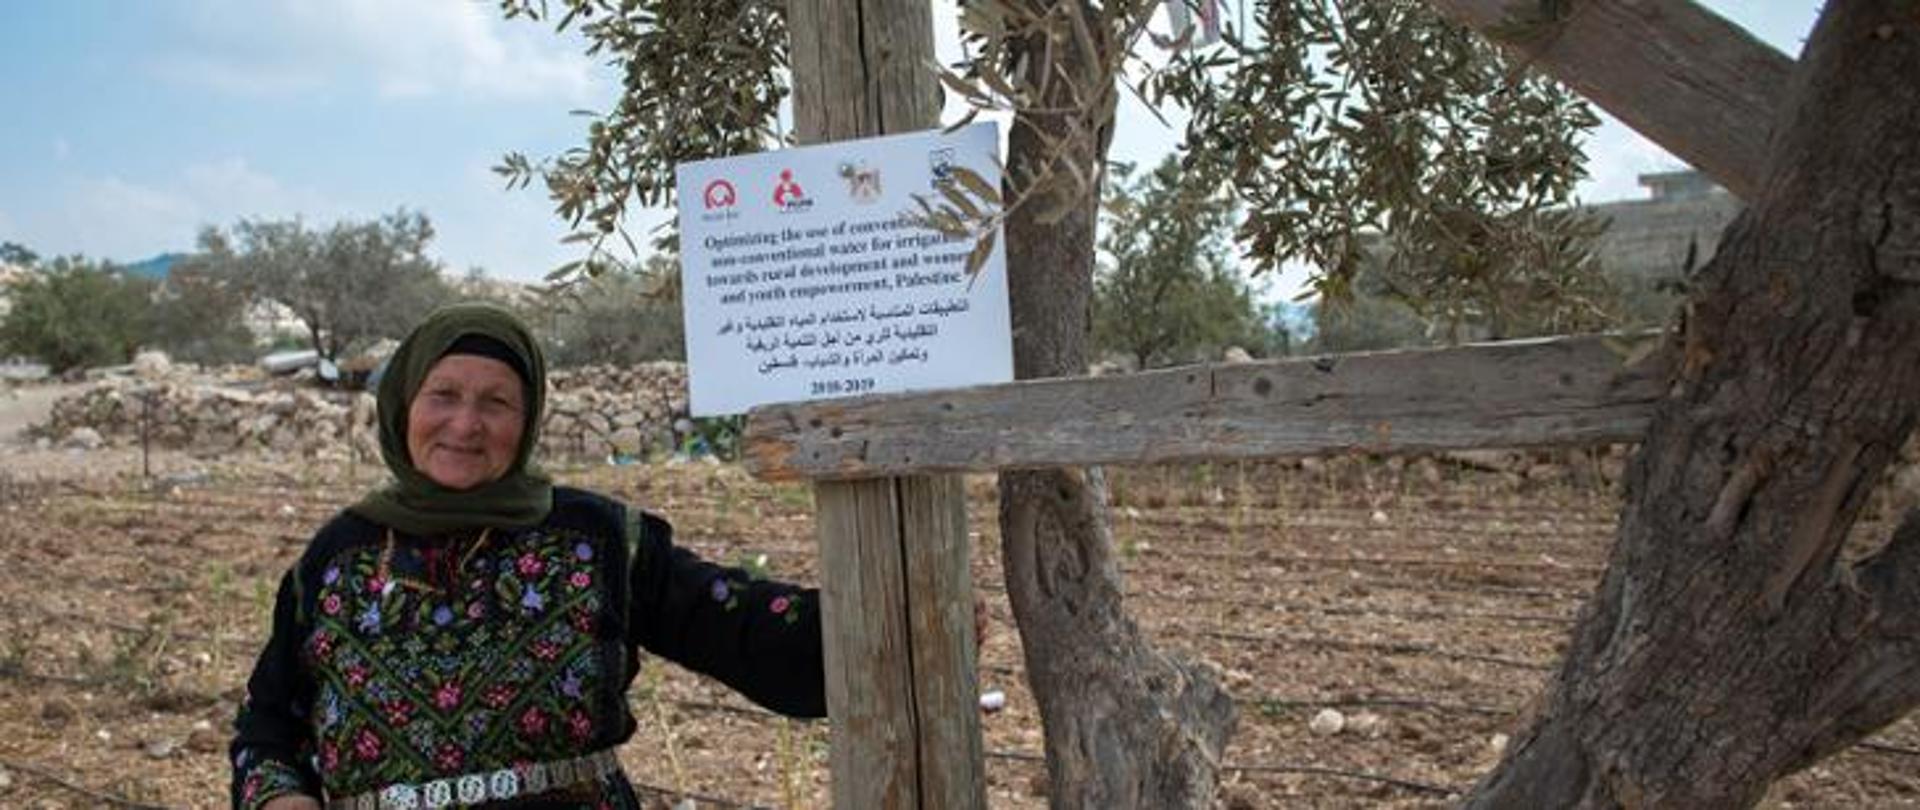 Optimisation of conventional and unconventional irrigation for the development of rural areas and mobilization of women and young people in Palestine
